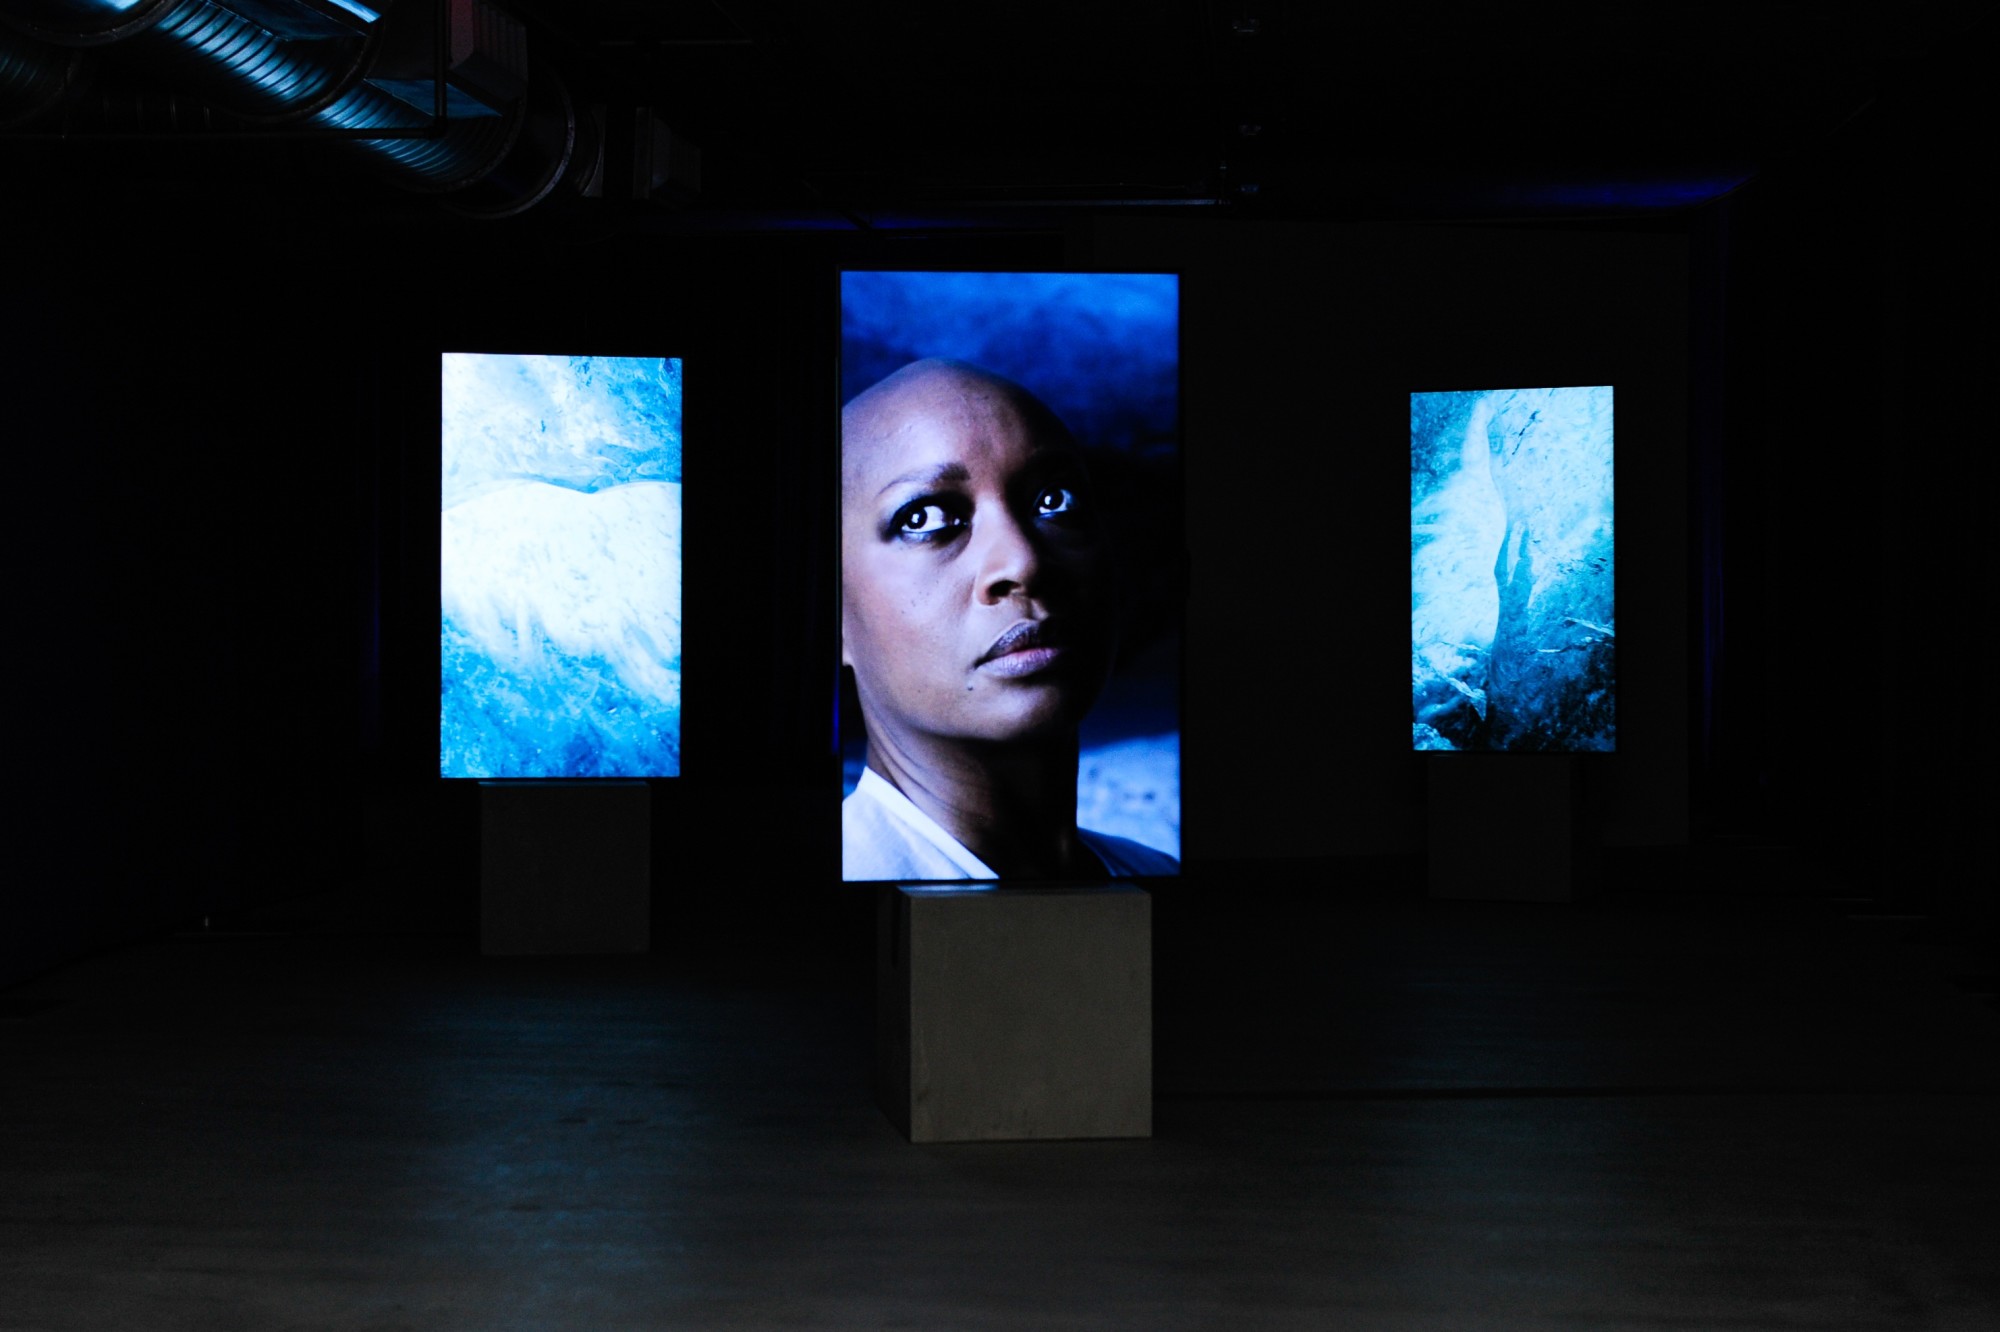 Stones Against Diamonds, Rolls-Royce Arts Programme. National YoungArts Foundation, Miami, 2015  58'28'', high definition video on 15 portrait screens, colour, stereo sound